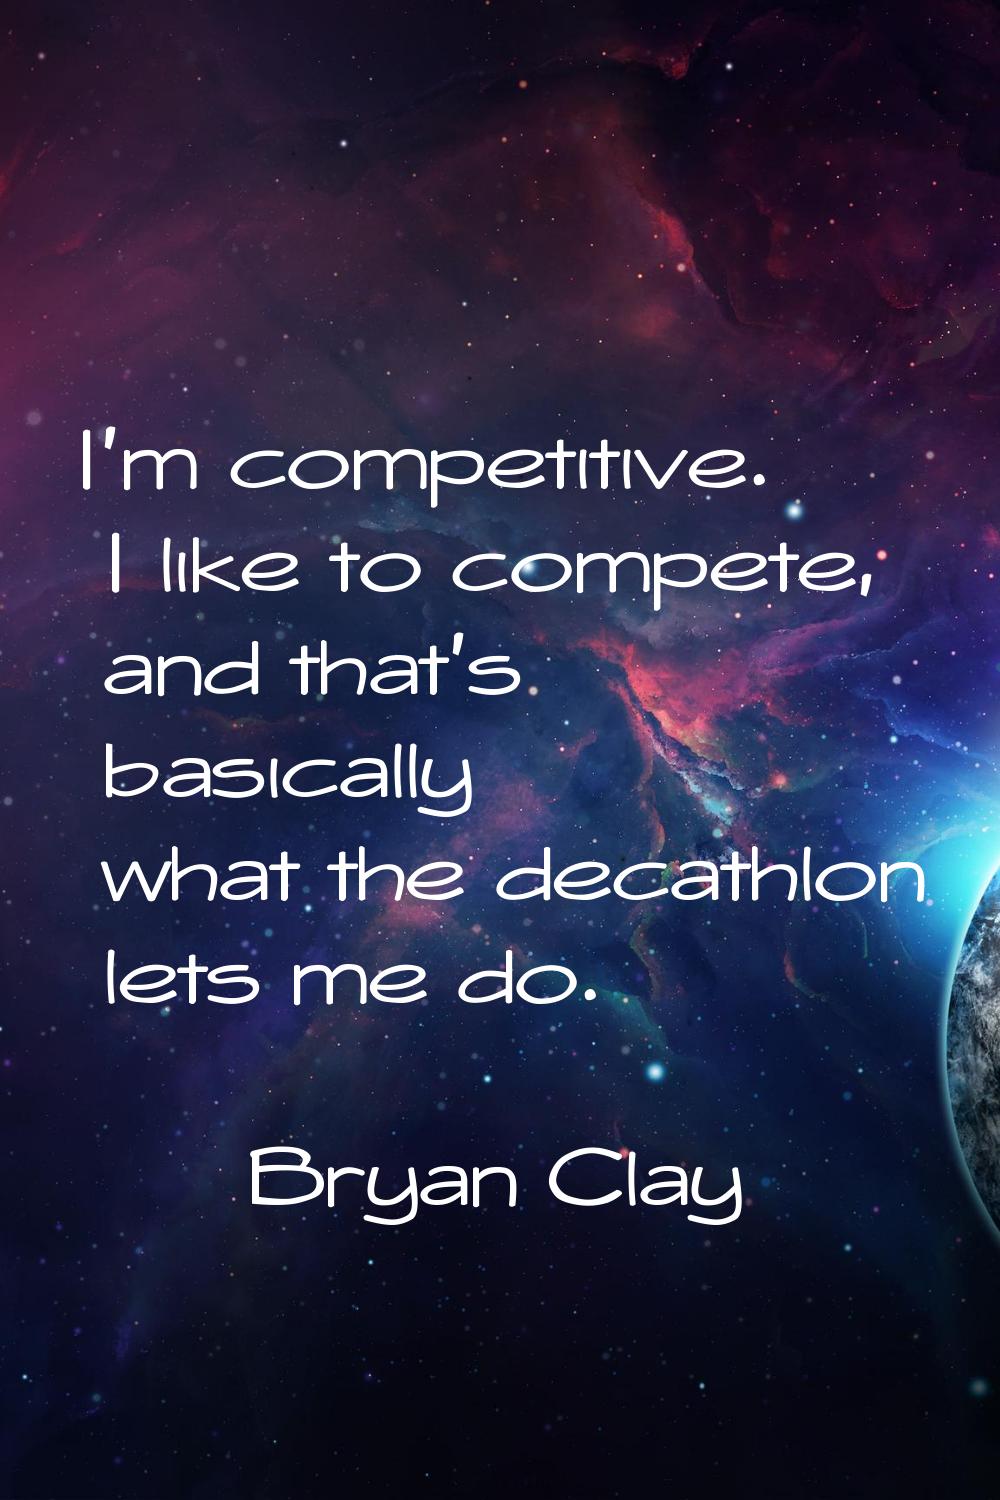 I'm competitive. I like to compete, and that's basically what the decathlon lets me do.